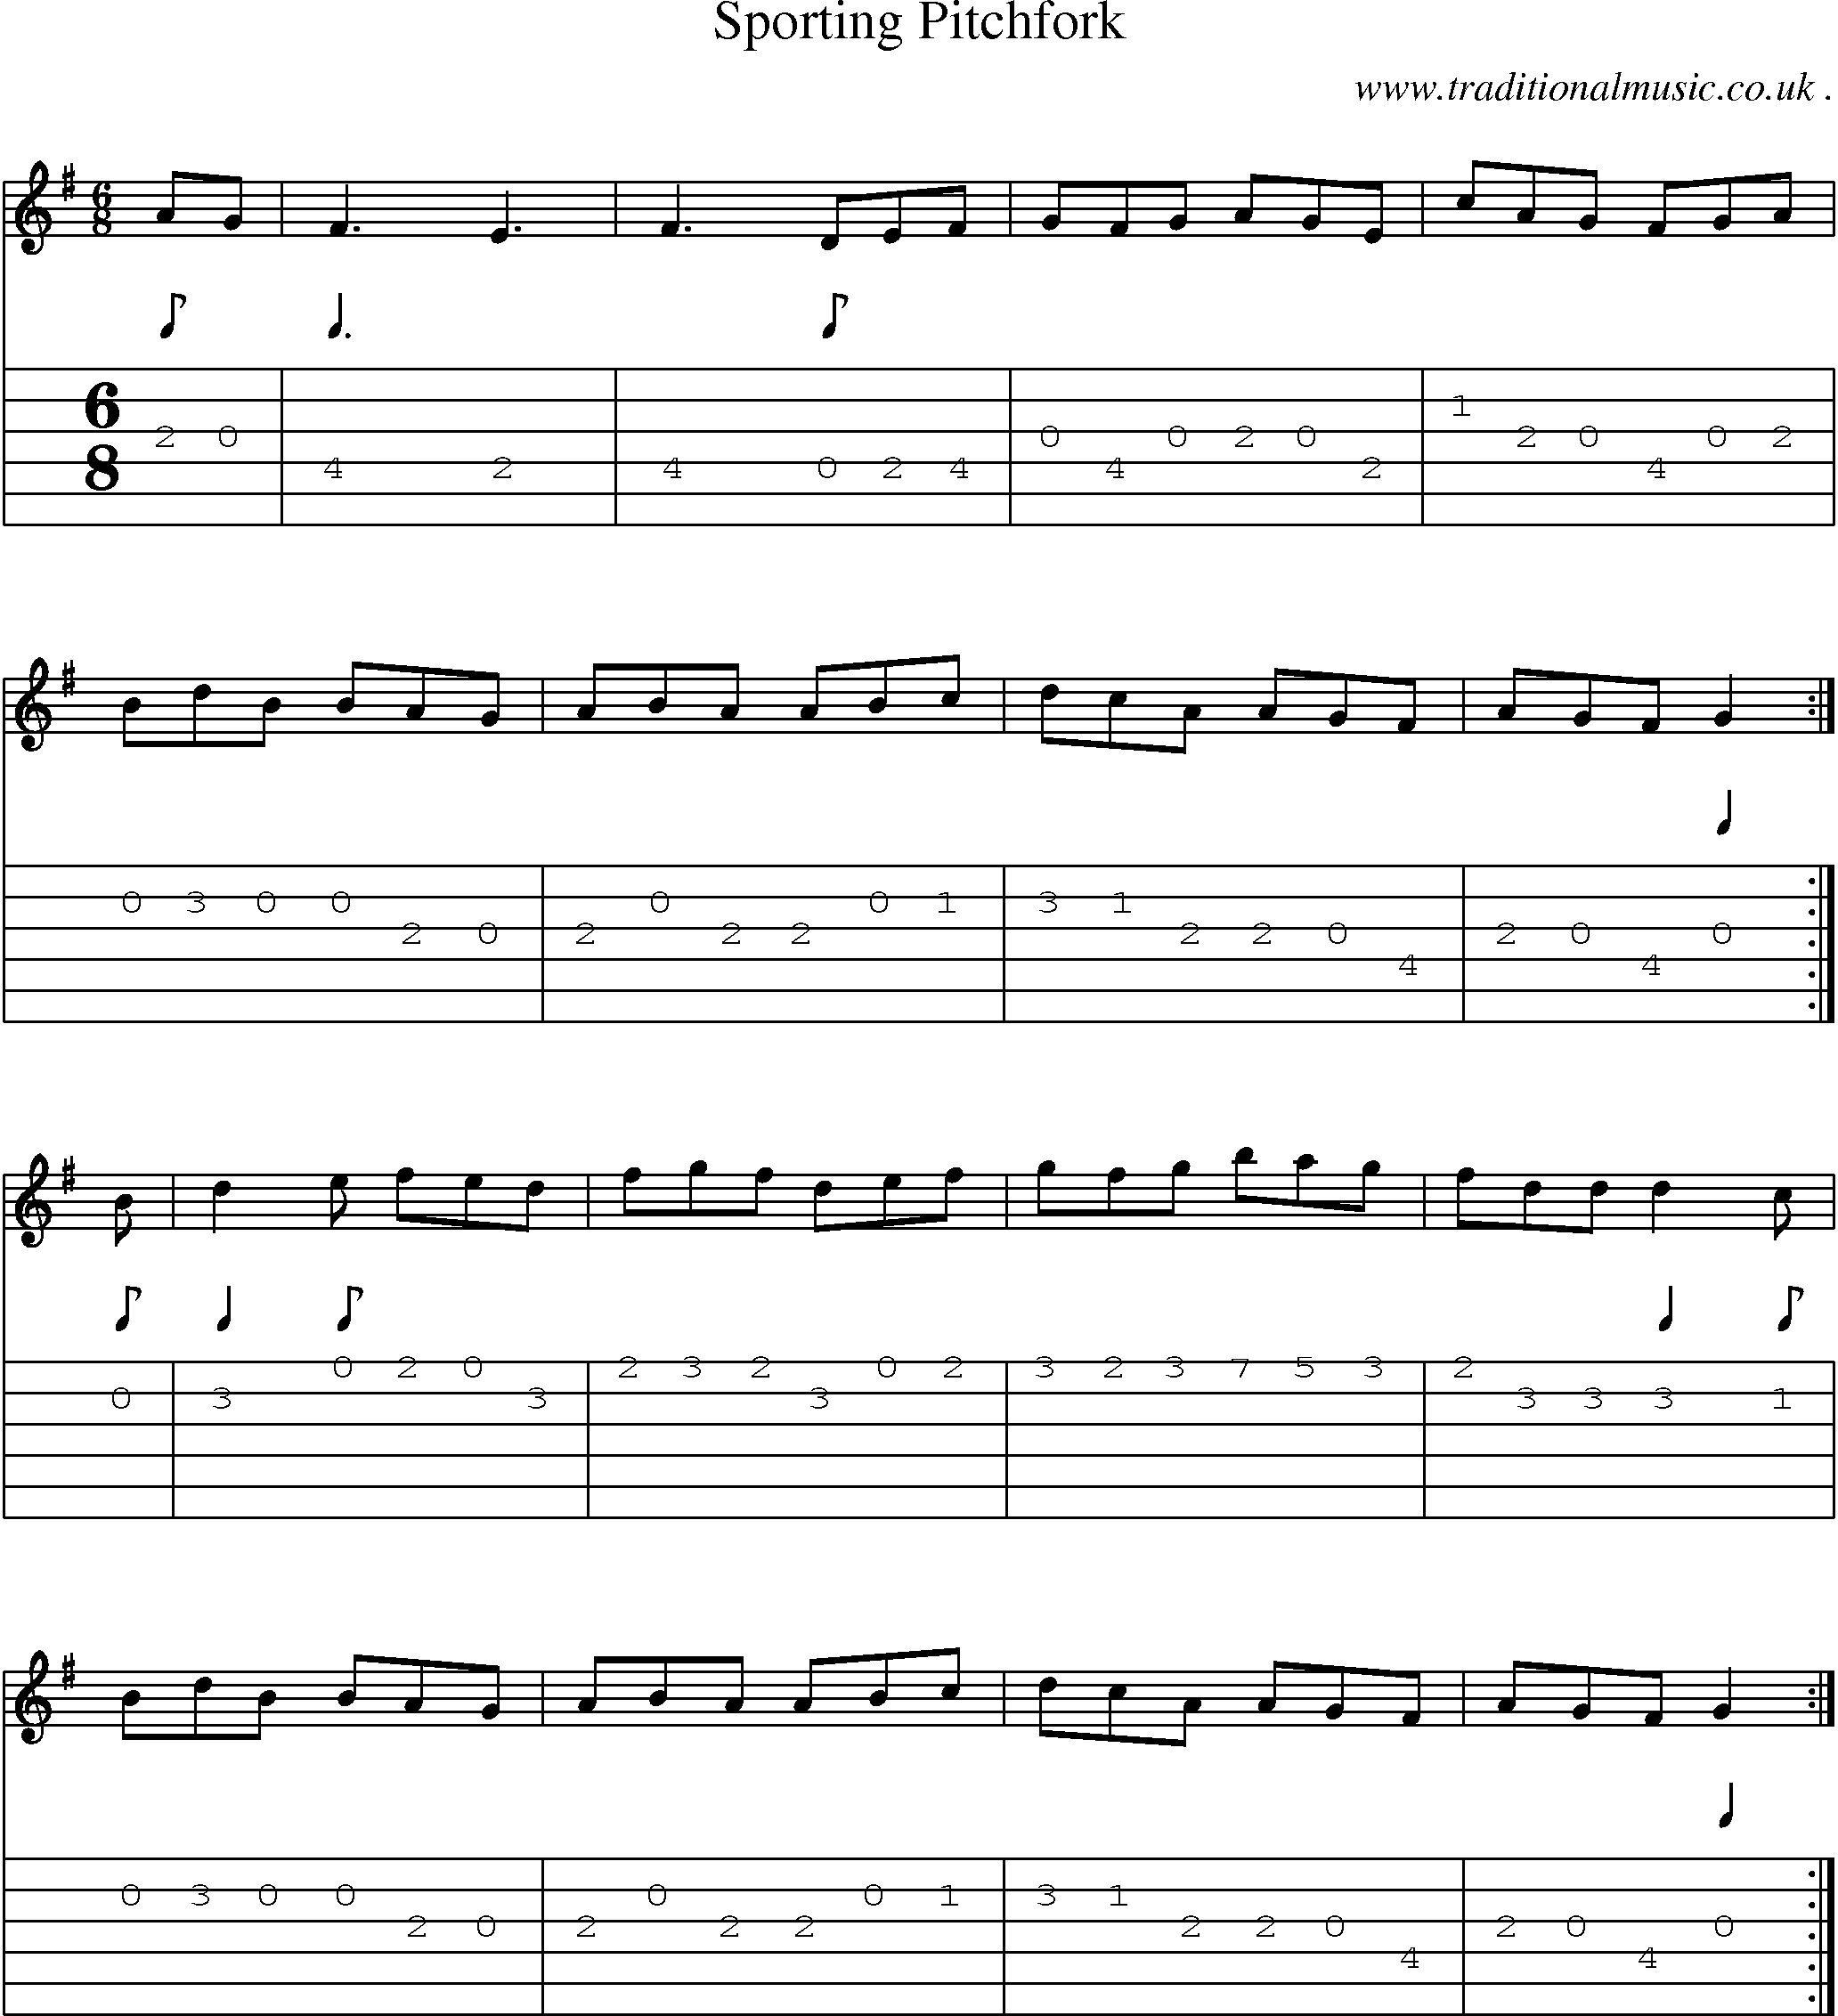 Sheet-Music and Guitar Tabs for Sporting Pitchfork